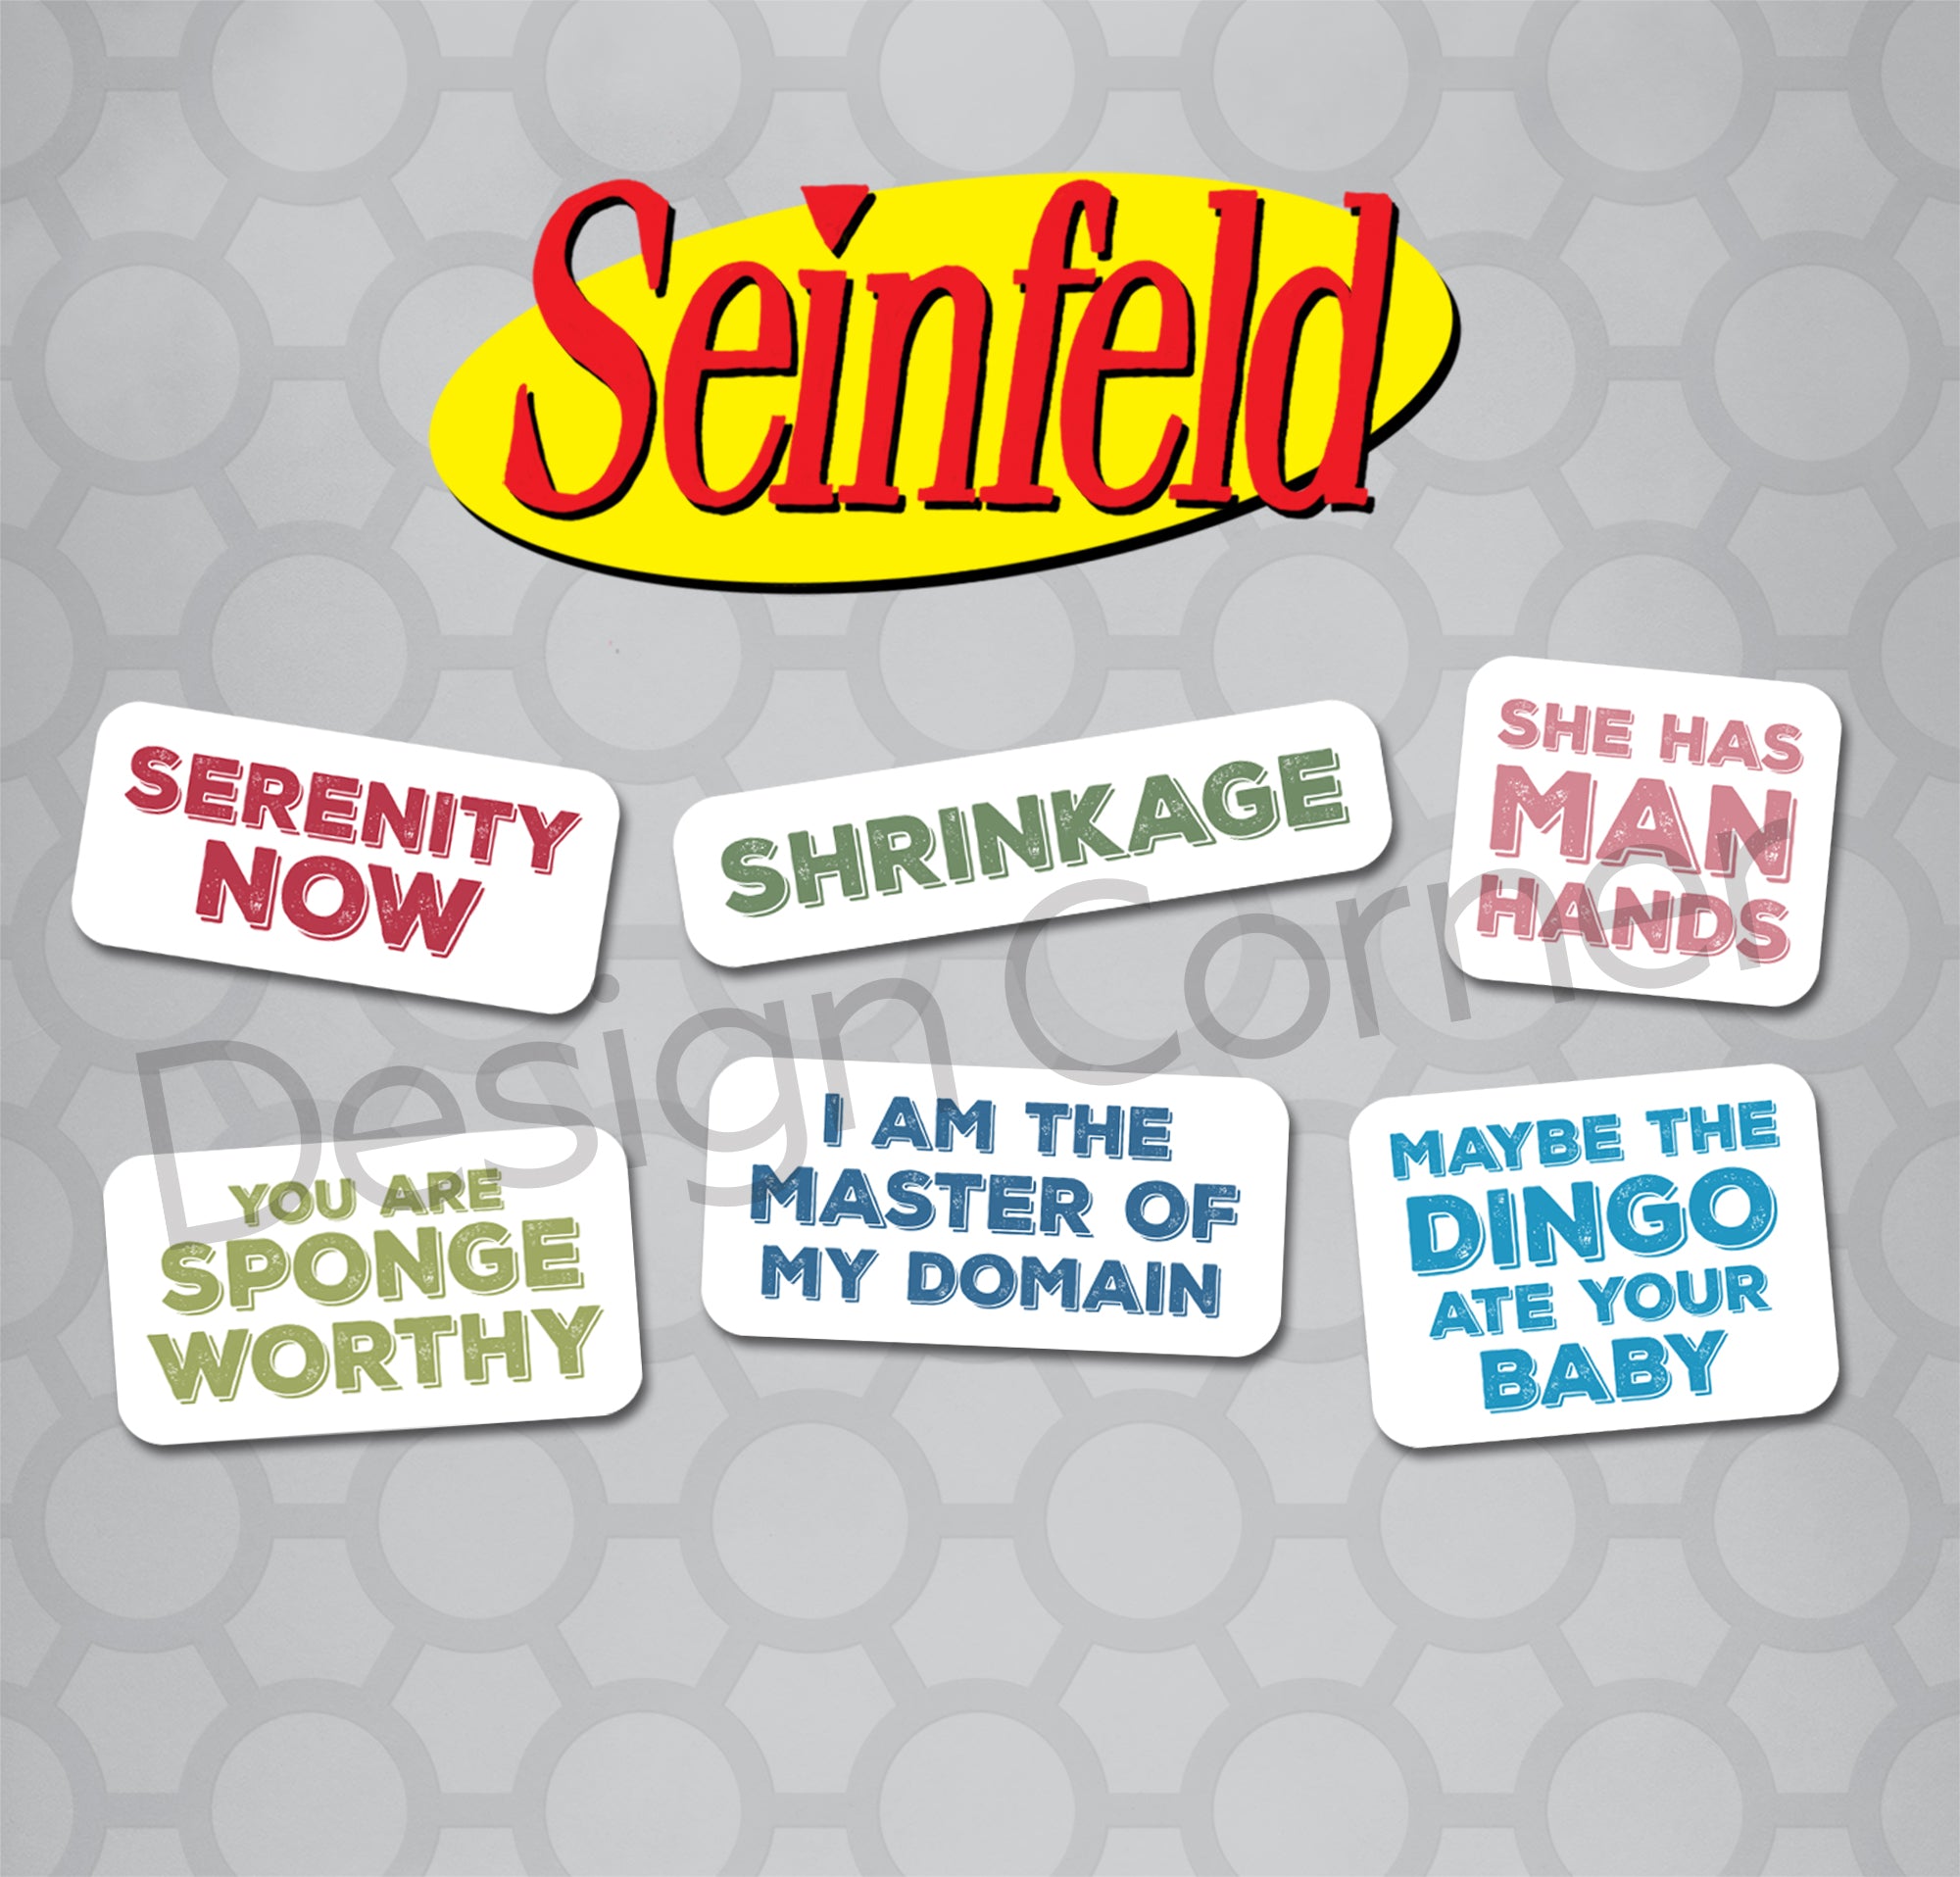 Die cut stickers with Seinfeld quotes. "Serentiy Now" "Shrinkage" "She has man hands" " Your are sponge worthy" "I am the master of my domain" "Maybe the dingo ate your baby"